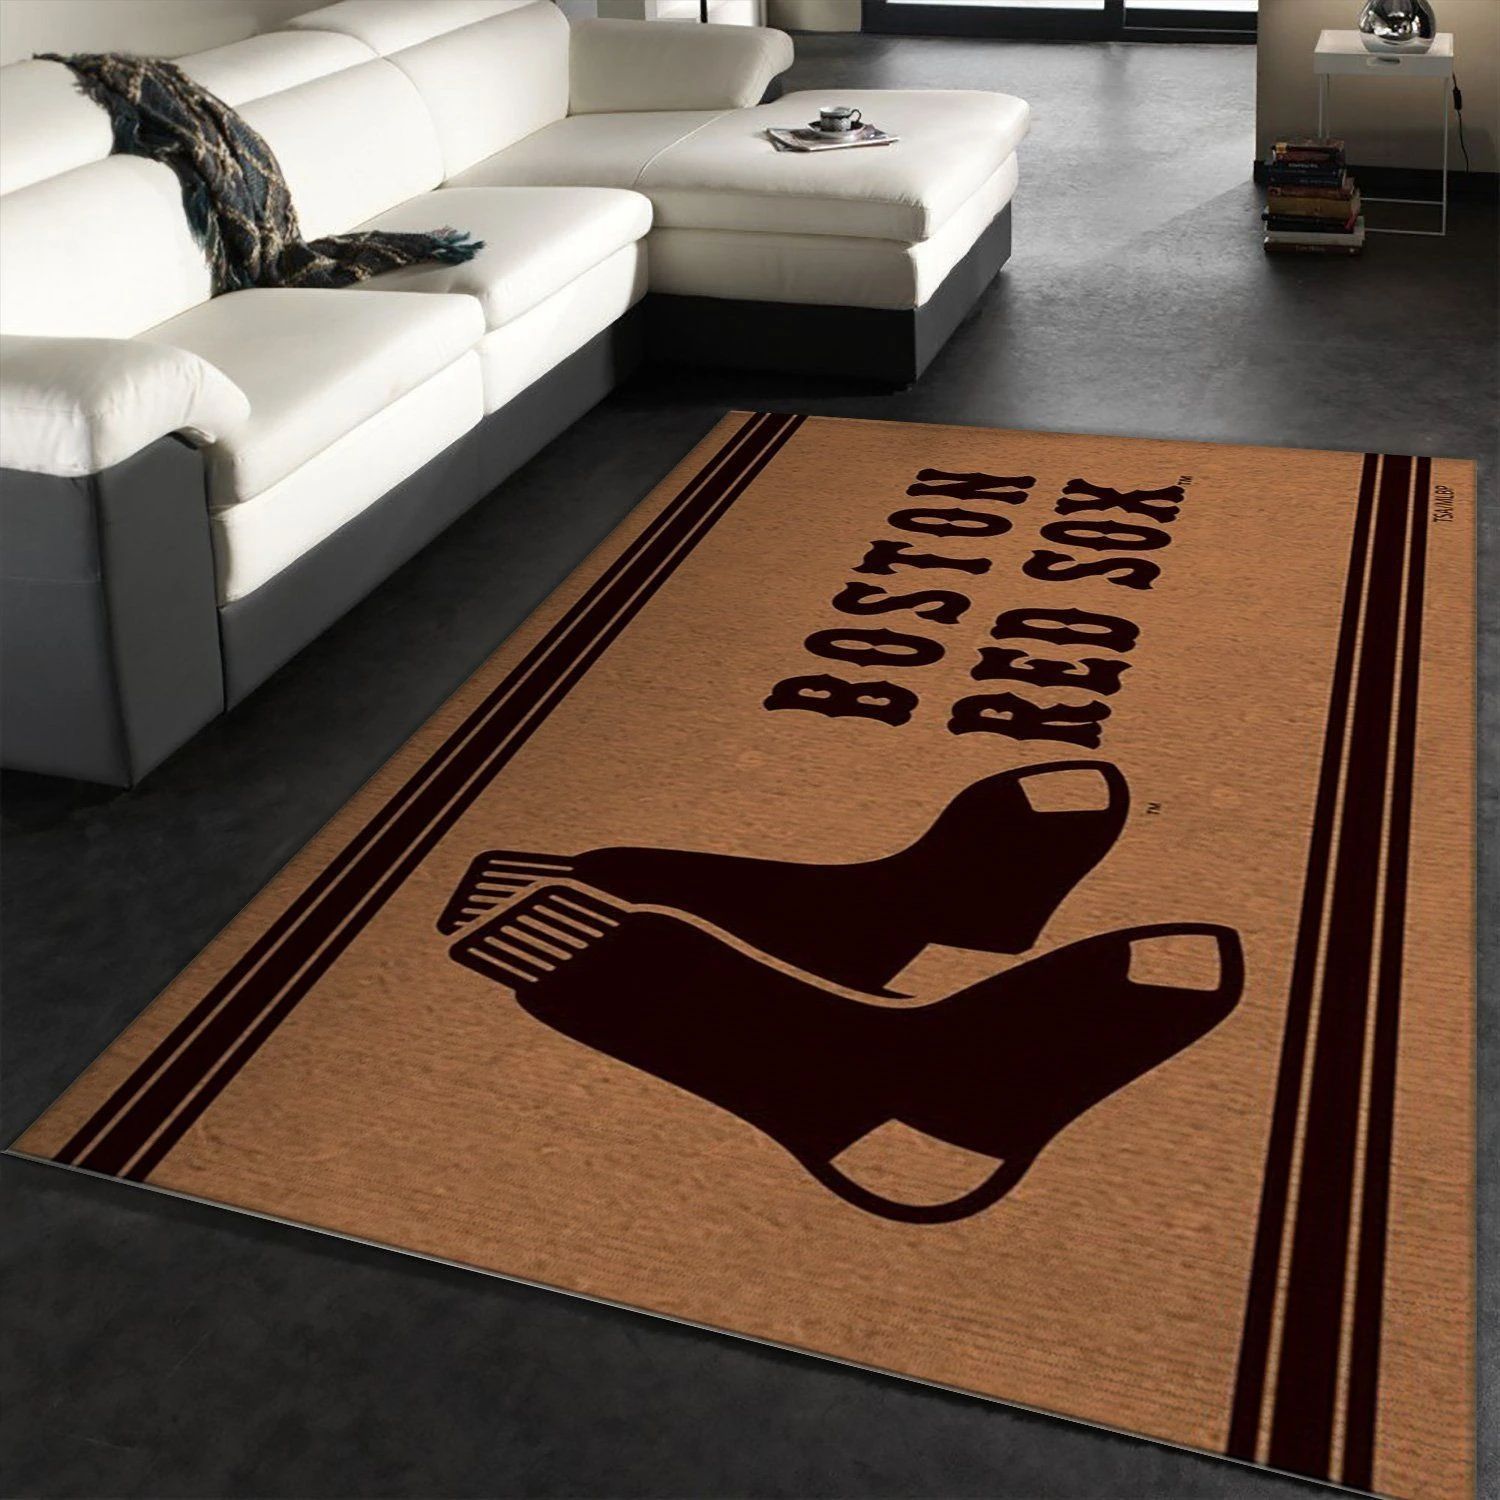 Boston Red Sox Logo Area Rug For Christmas, Living Room Rug, Home Decor Floor Decor - Indoor Outdoor Rugs